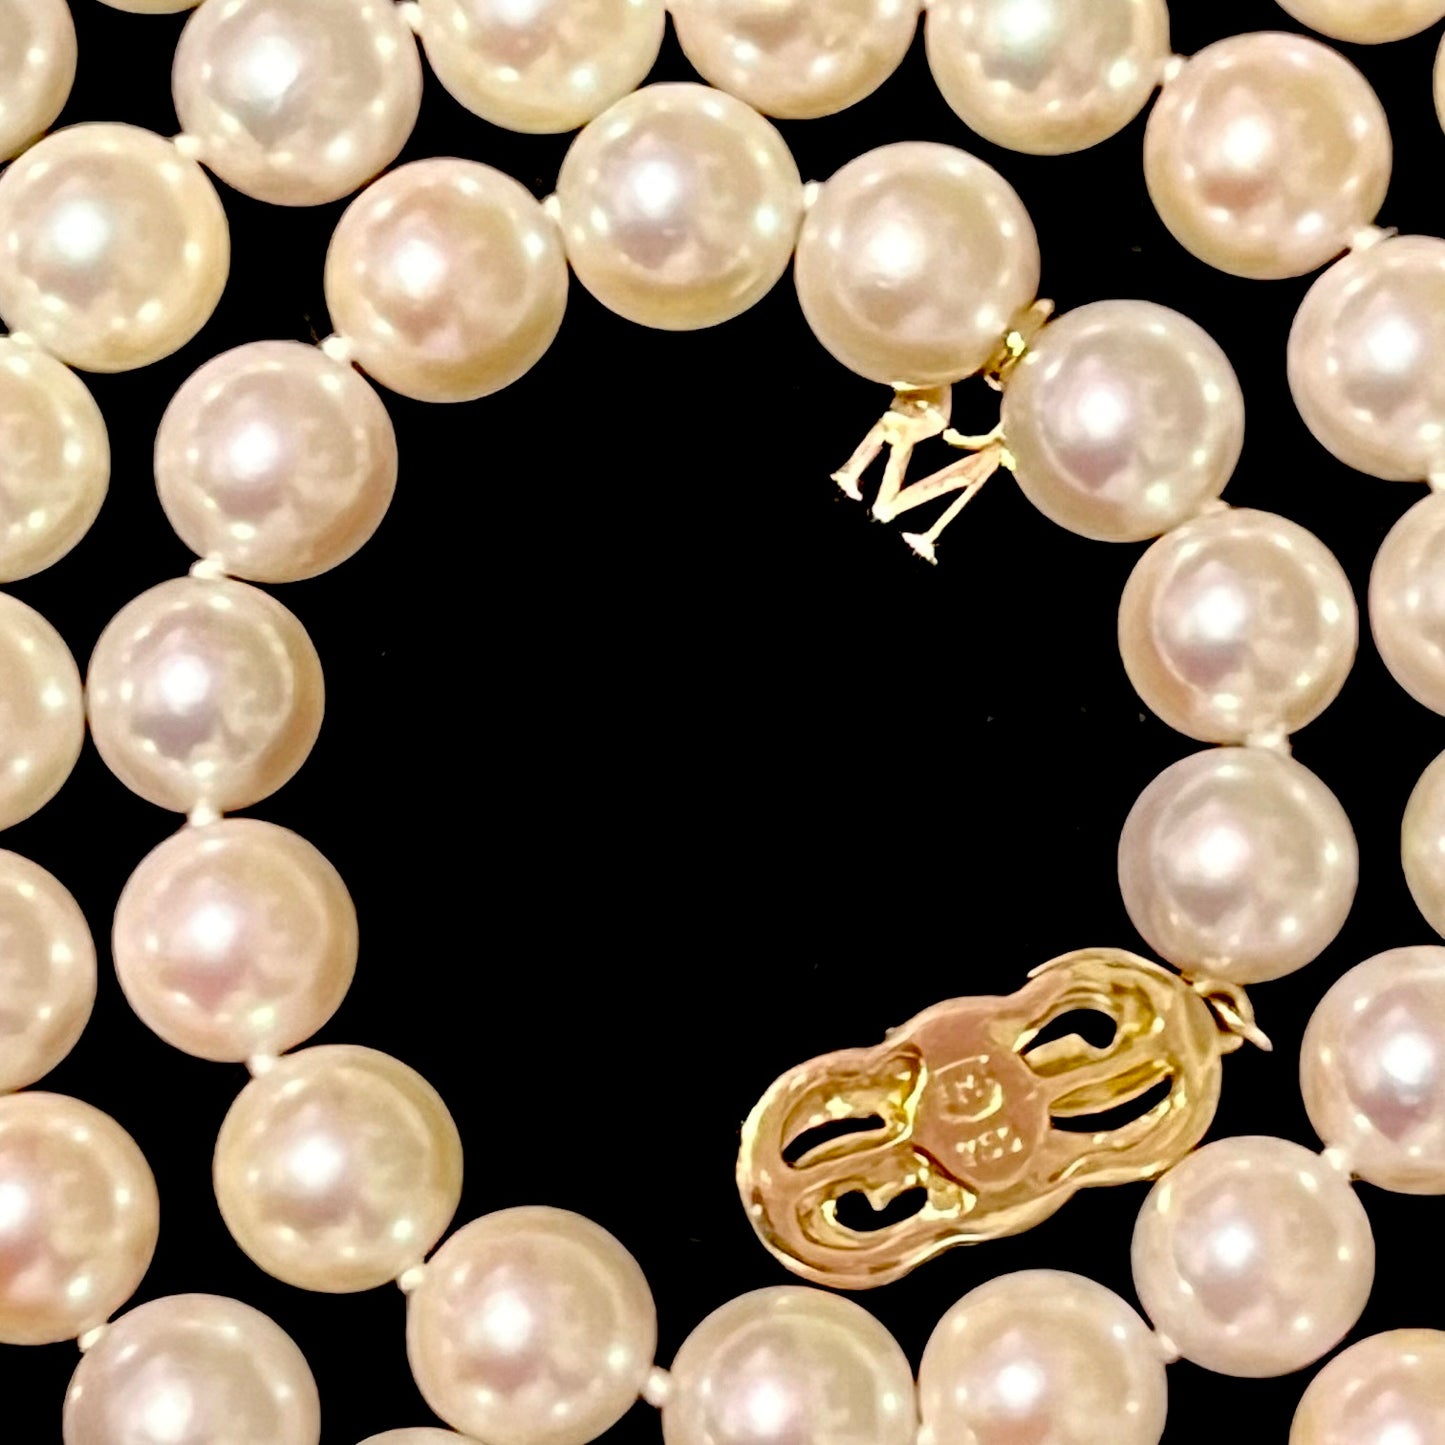 Mikimoto Estate Akoya Pearl Necklace 17" 18k Y Gold 8 mm Certified $11,450 311934